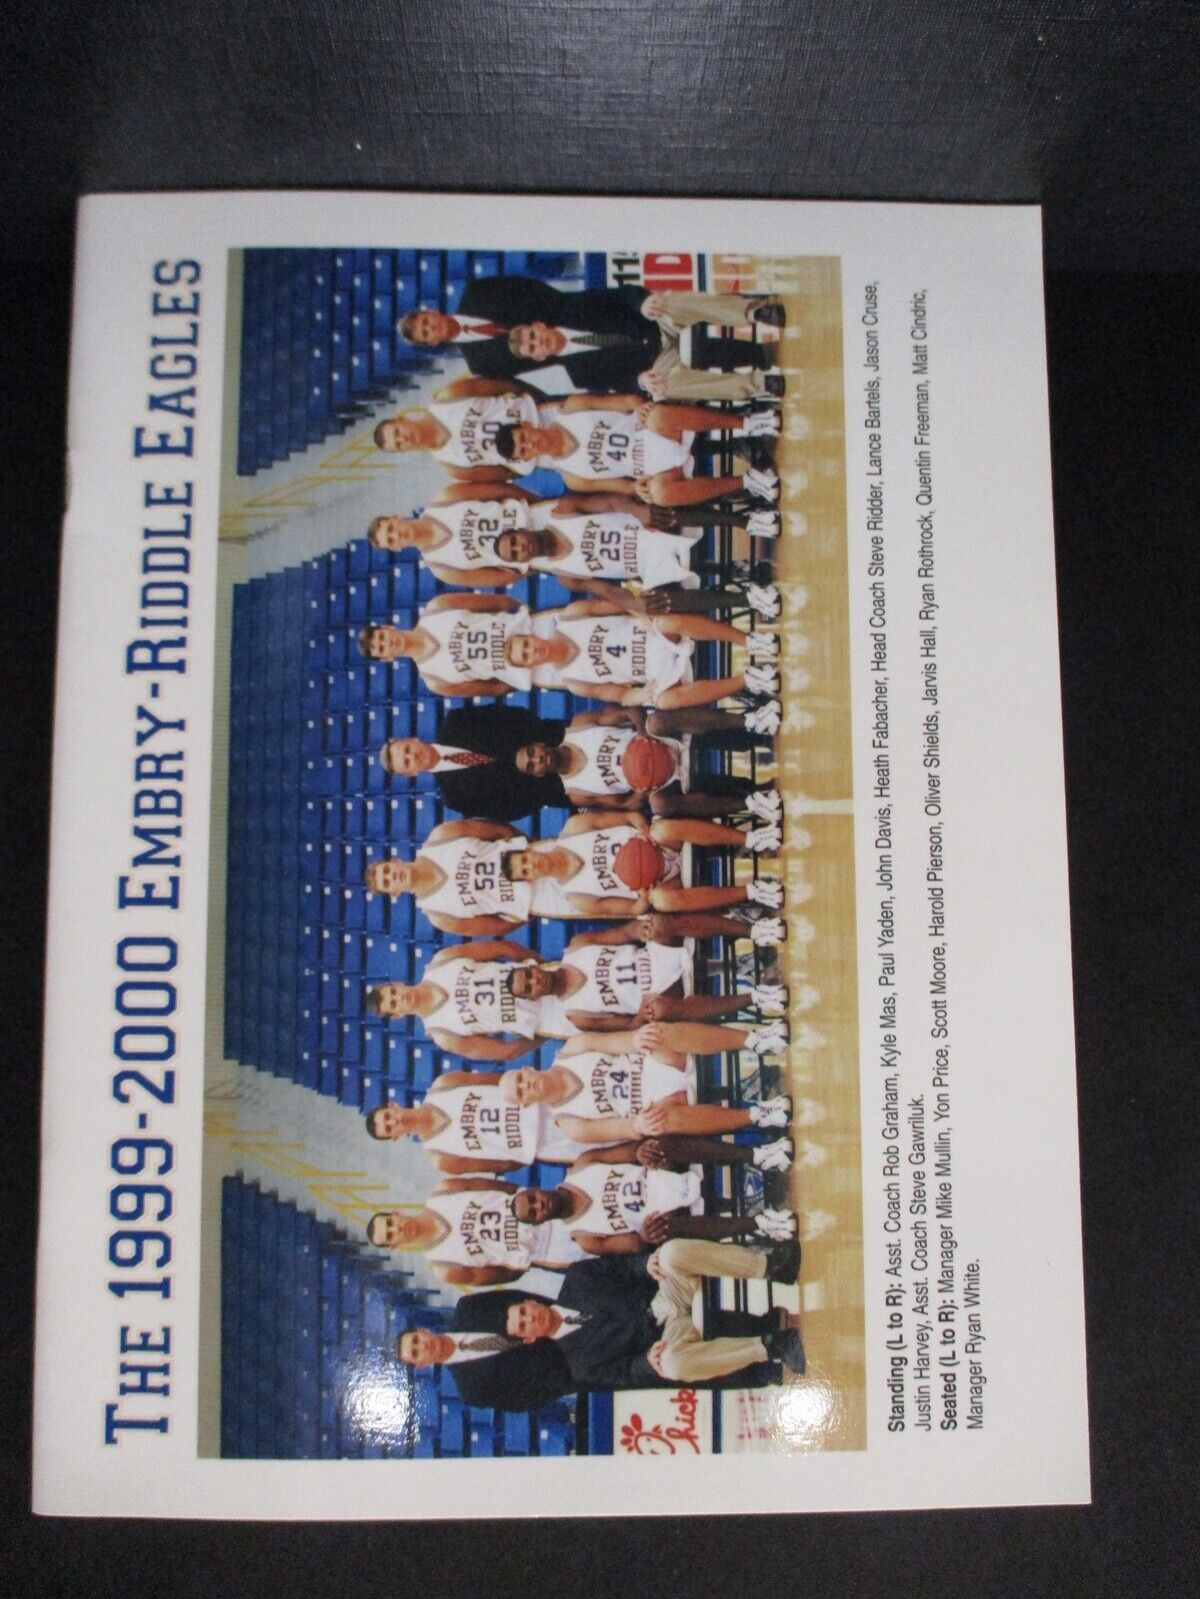 1999 - 2000 Embry Riddle Eagles Basketball Drive for Five Media Guide Excellent